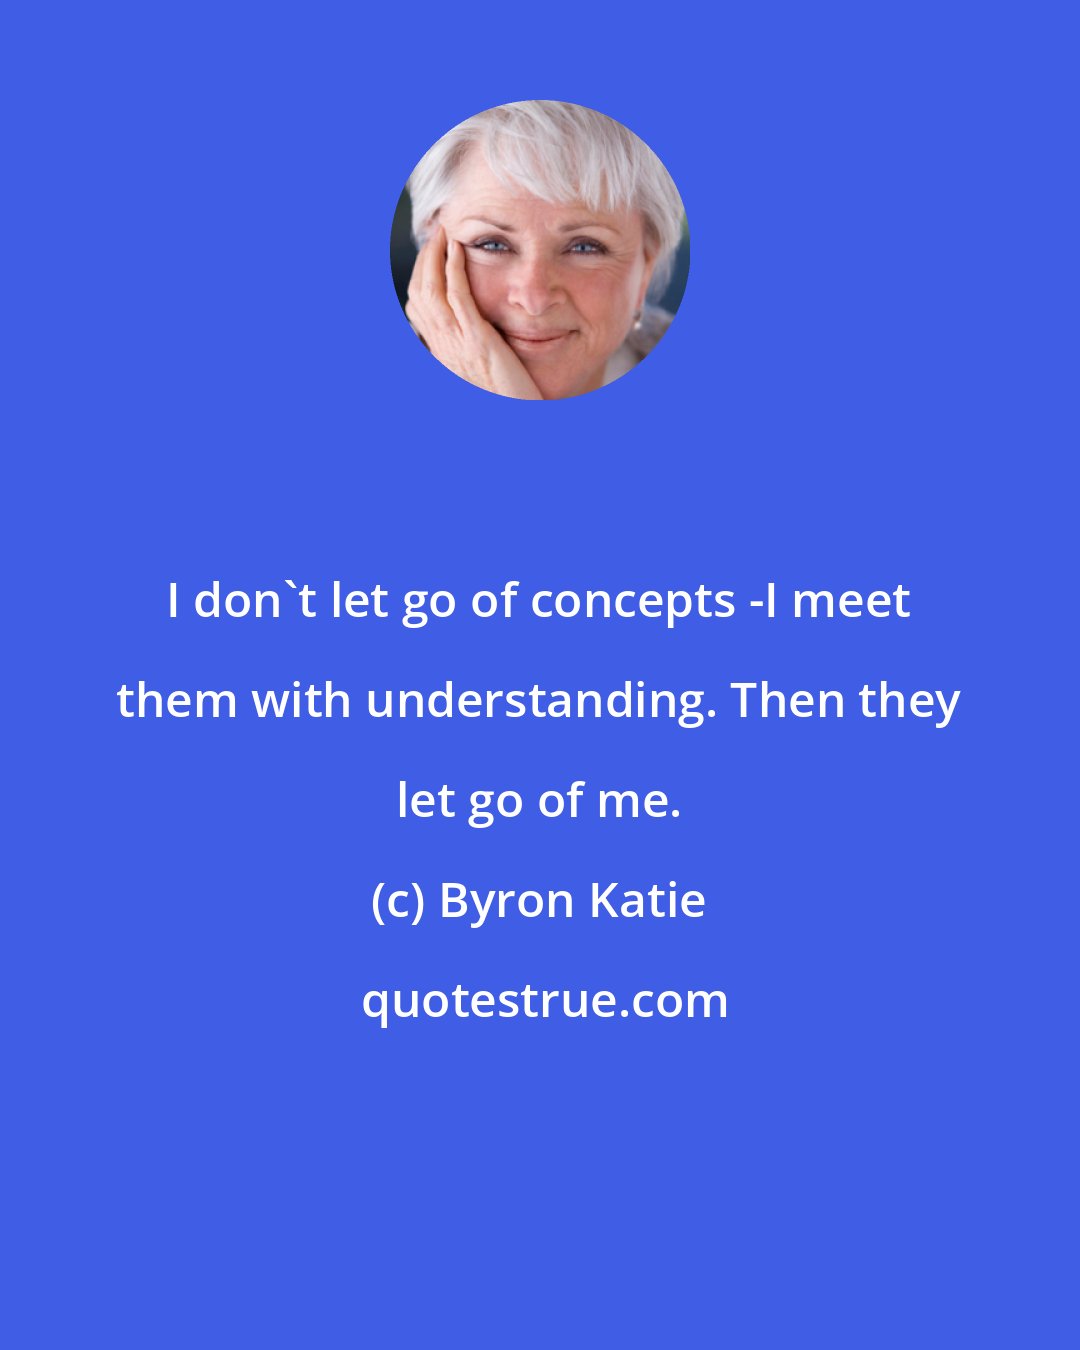 Byron Katie: I don't let go of concepts -I meet them with understanding. Then they let go of me.